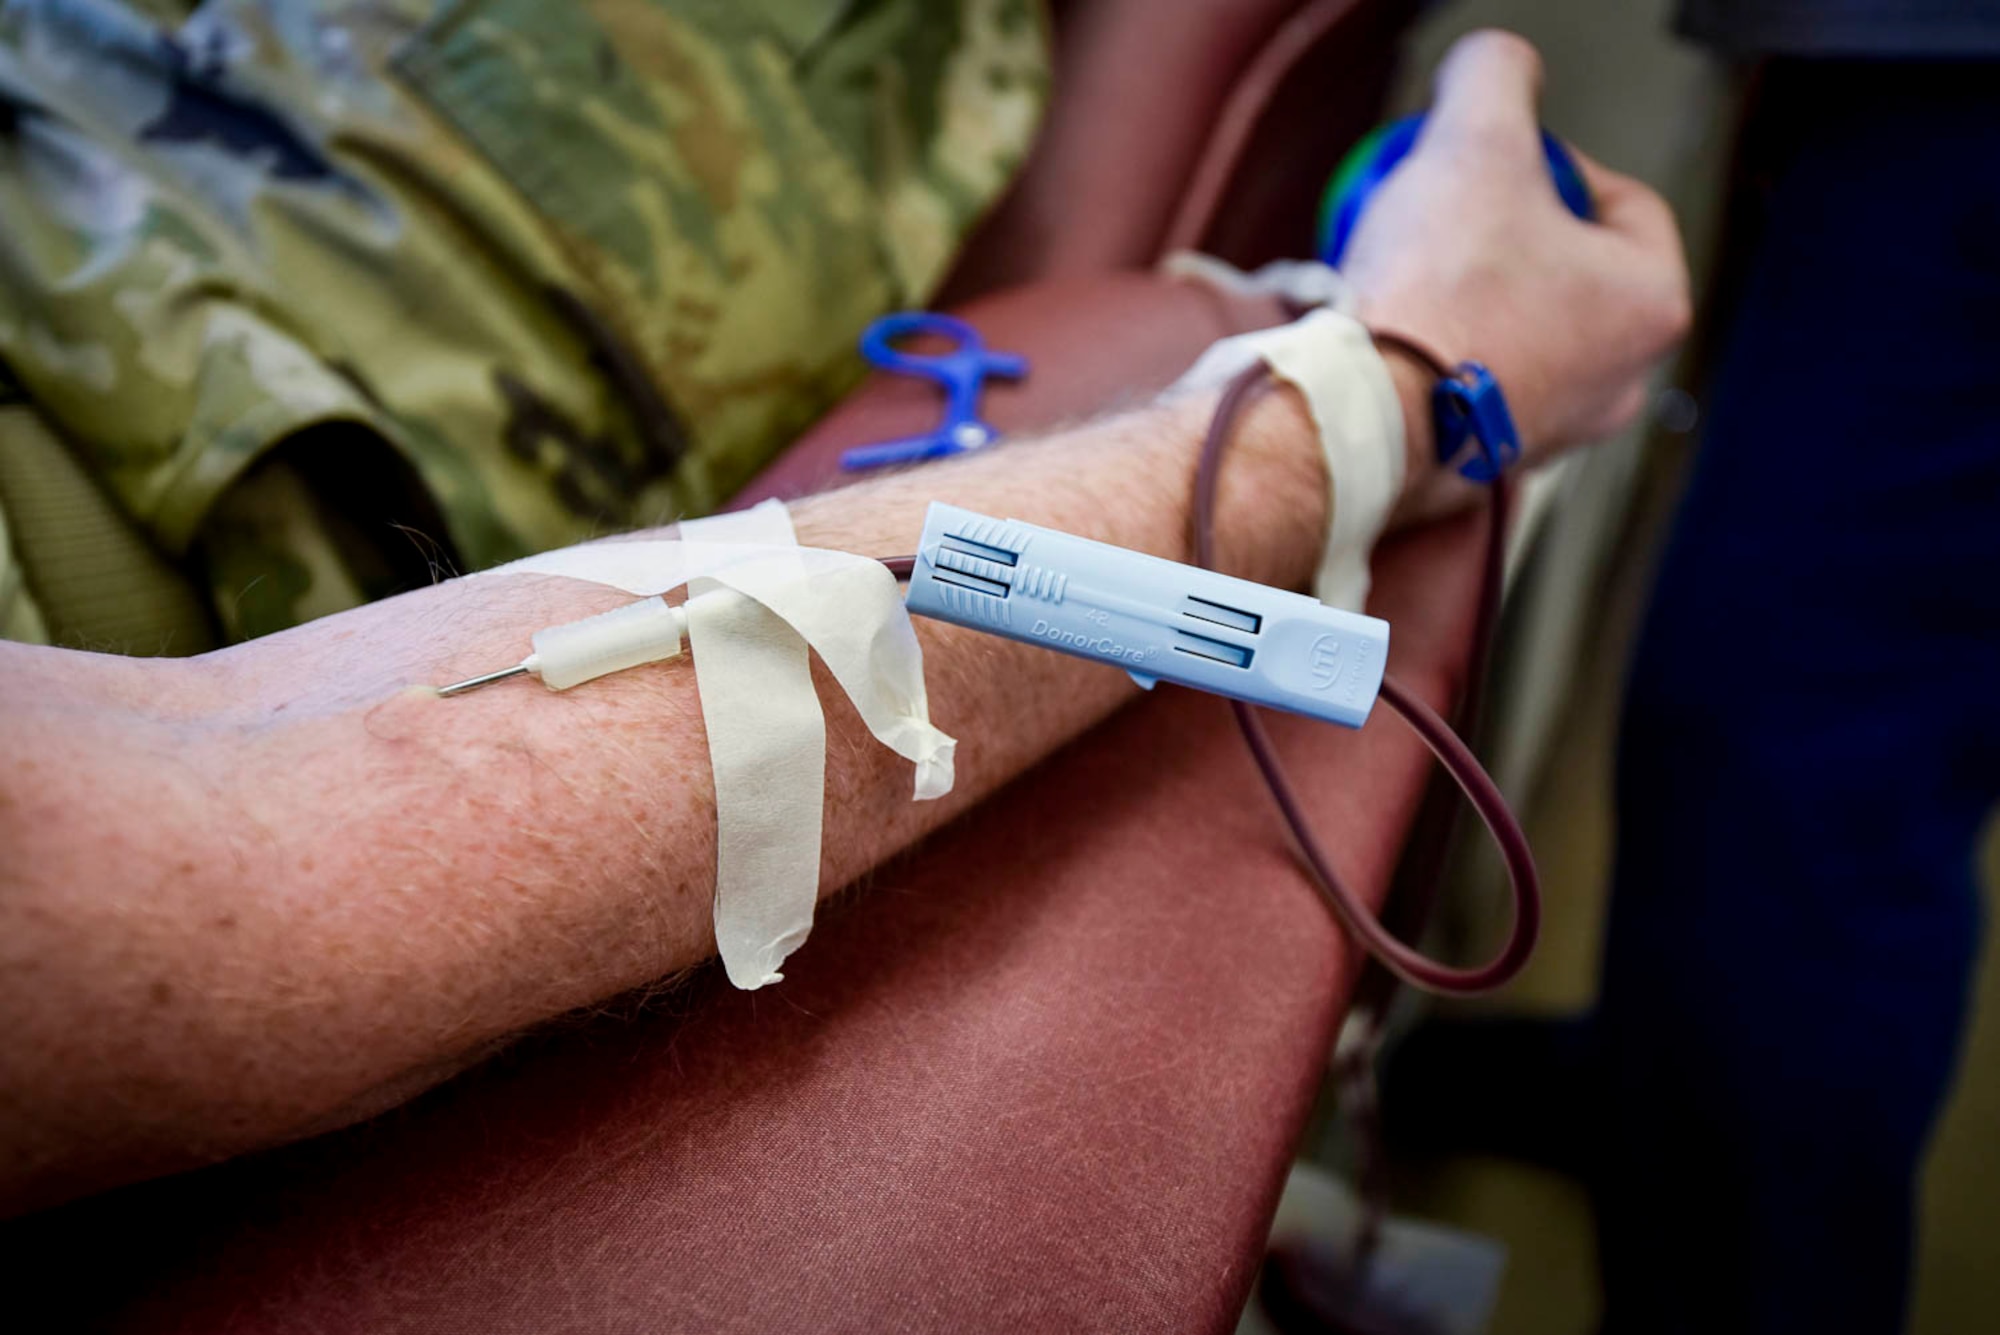 An Airman participates in a blood drive conducted by the Arkansas Blood Institute at Little Rock Air Force Base, Arkansas, Aug. 4, 2019. The Arkansas Blood Institute is a non-profit blood center whose volunteer donors provide every drop of blood needed by patients in 40 Arkansas hospitals. The number one reason donors say they give blood is because they “want to help others.” (U.S. Air Force photo by Senior Airman Byrnes)